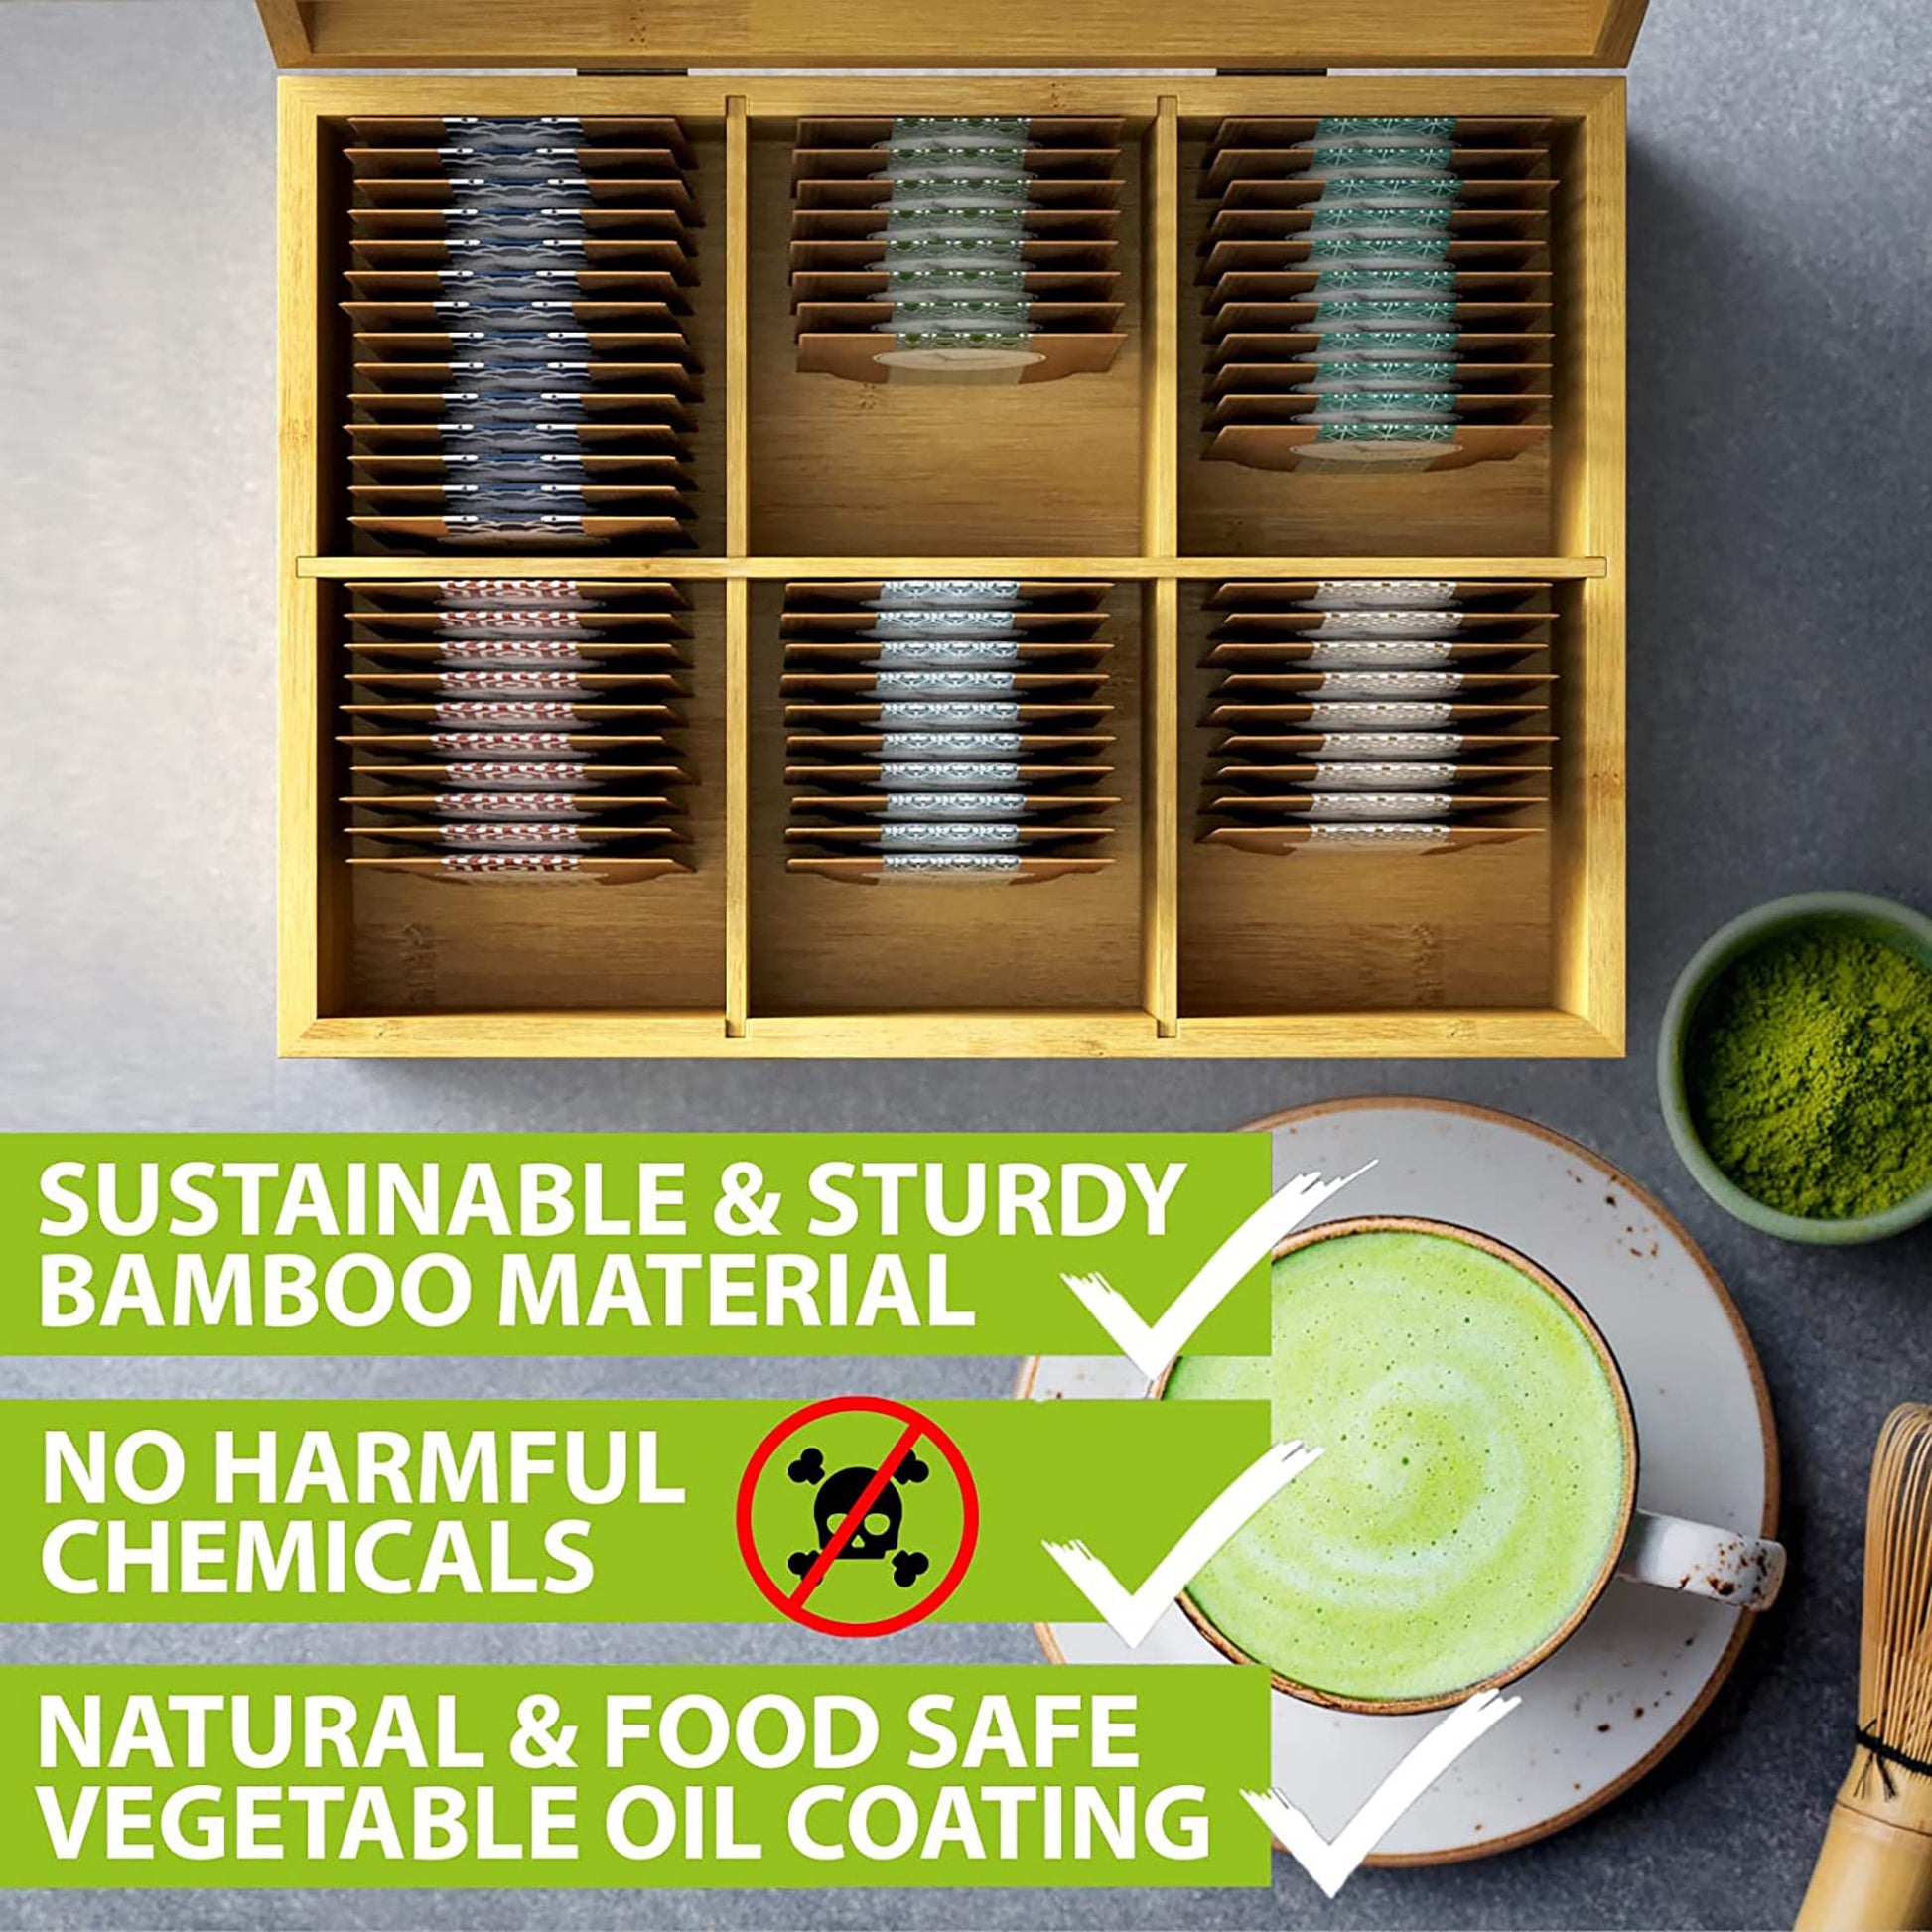 6-Slot Bamboo Tea Organizer Box, Countertop Storage Chest with Adjustable  Slot Compartments - Eco-Friendly Chemical Free Finish